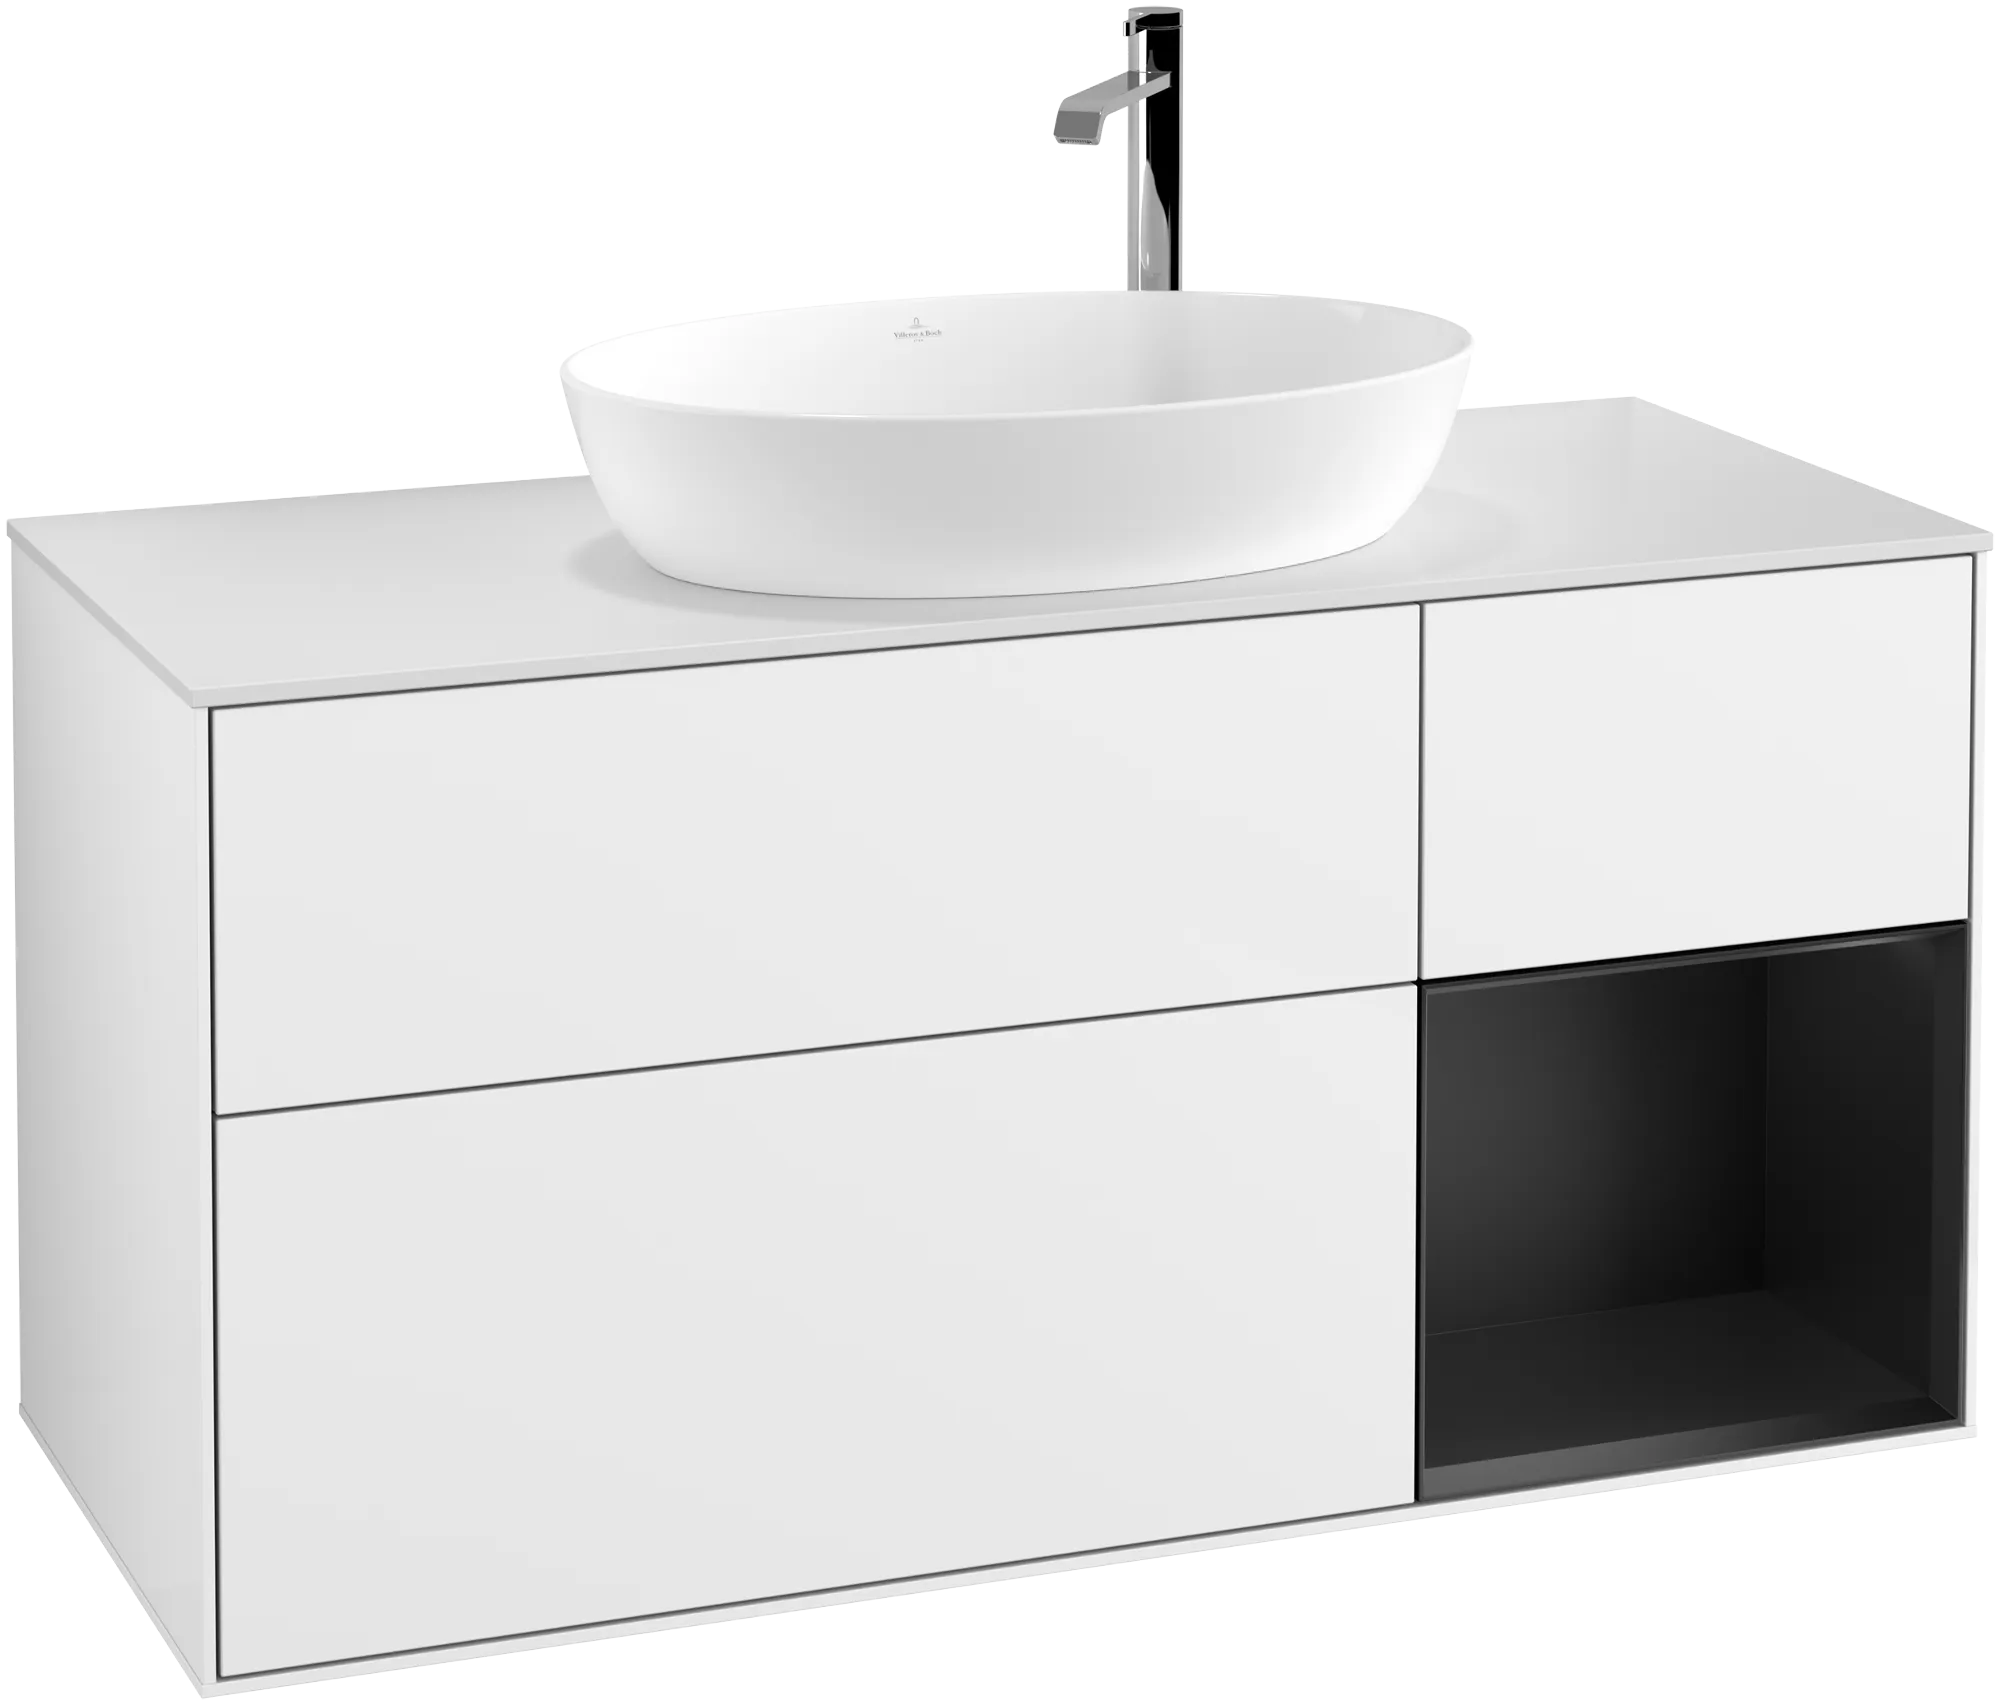 Picture of VILLEROY BOCH Finion Vanity unit, with lighting, 3 pull-out compartments, 1200 x 603 x 501 mm, Glossy White Lacquer / Black Matt Lacquer / Glass White Matt #G951PDGF